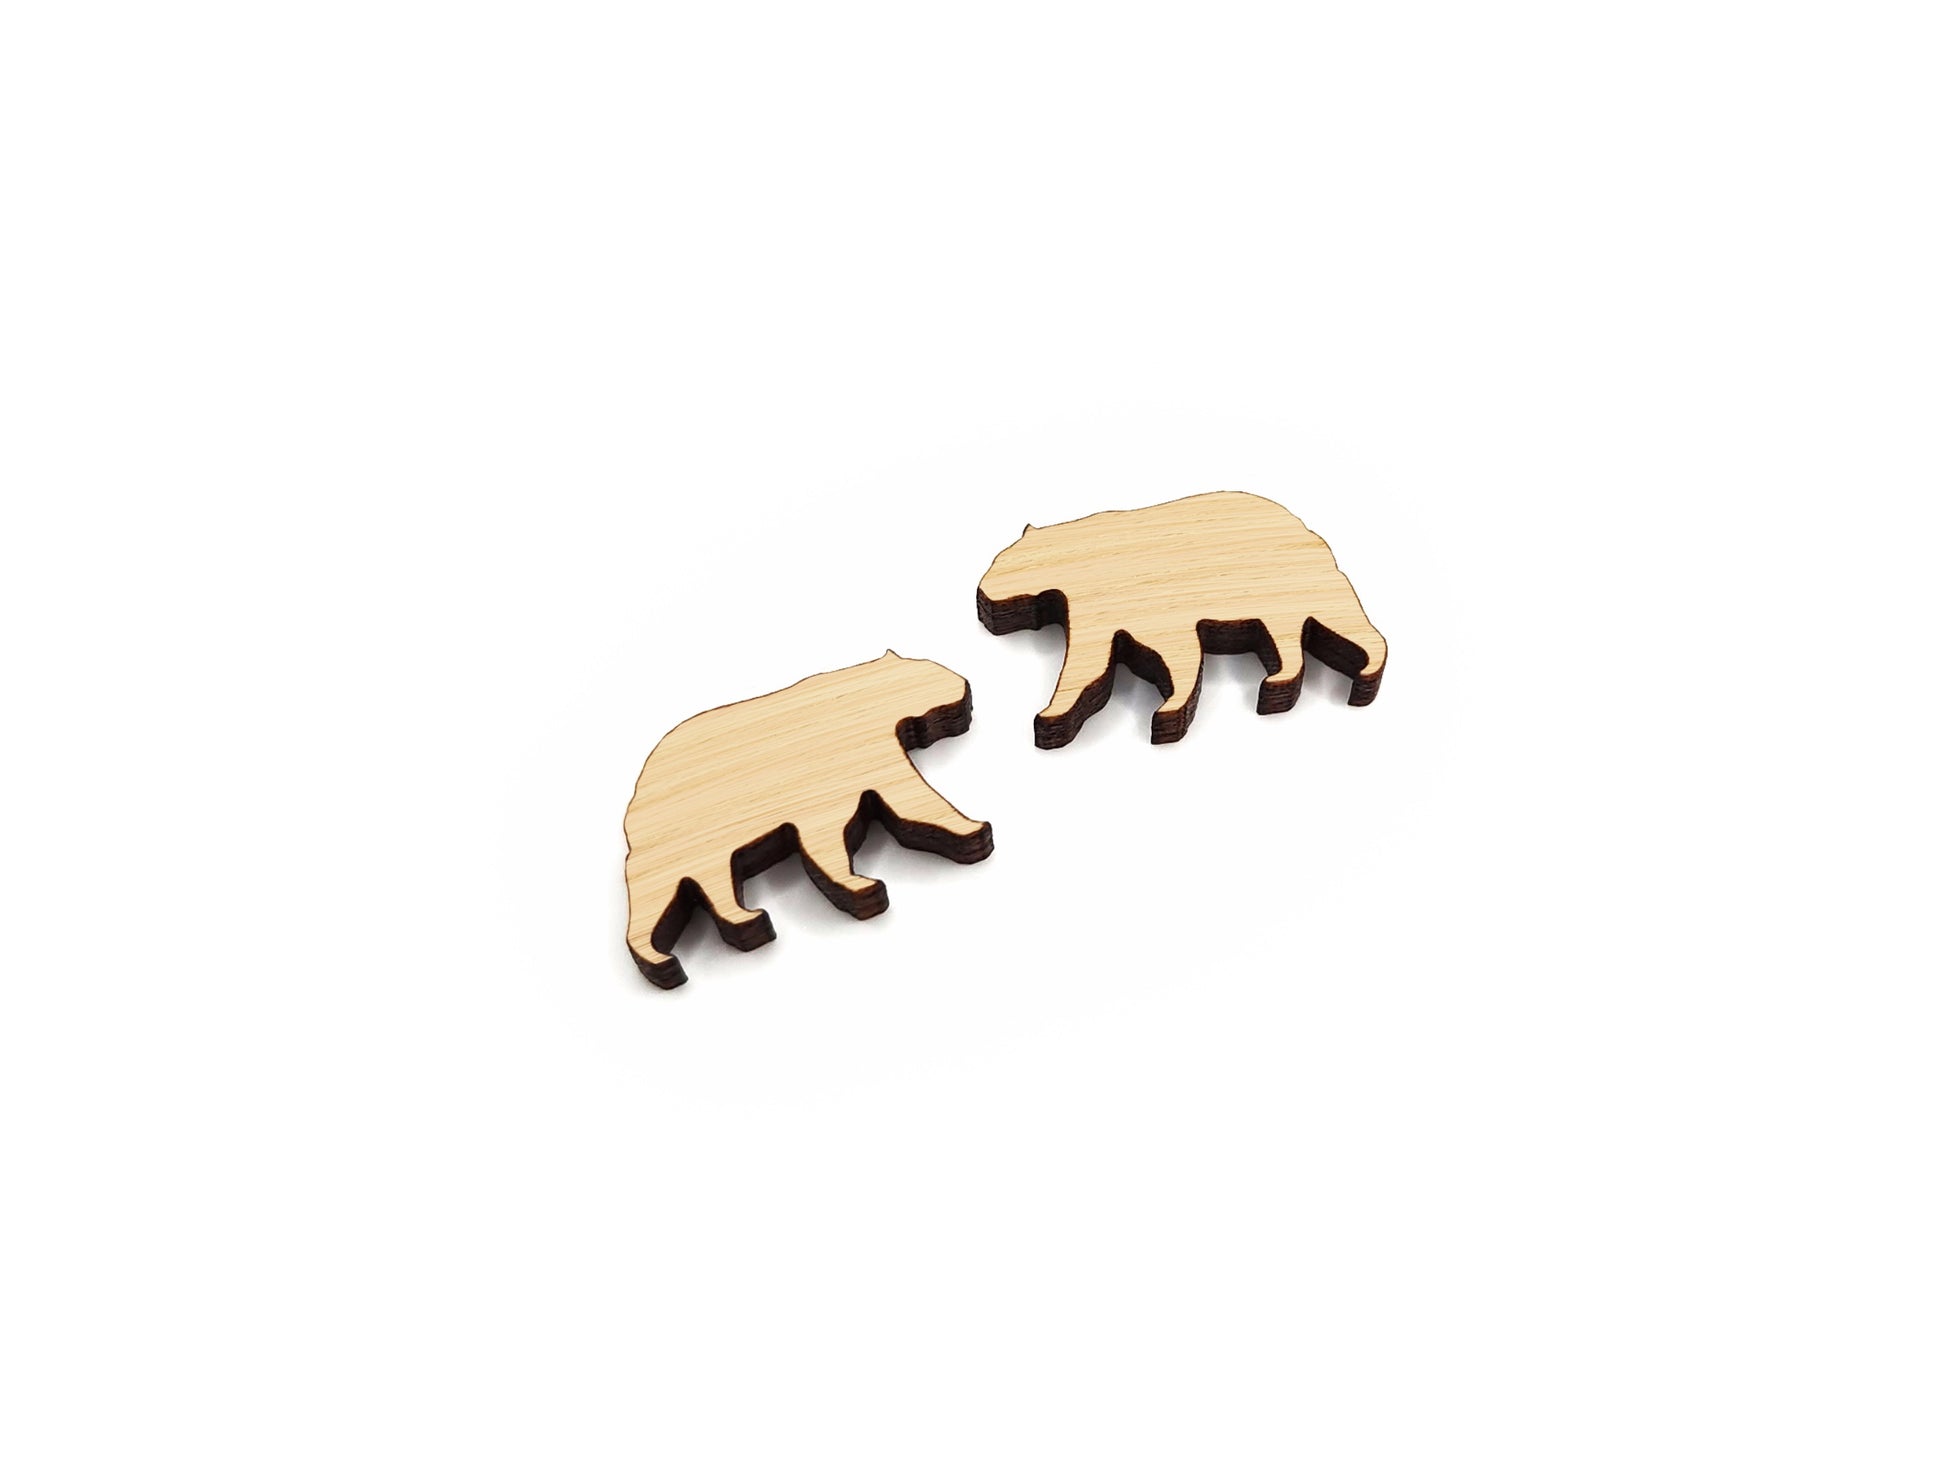 A pair of wood and acrylic cabochon earring blanks cut in the shape of a bear